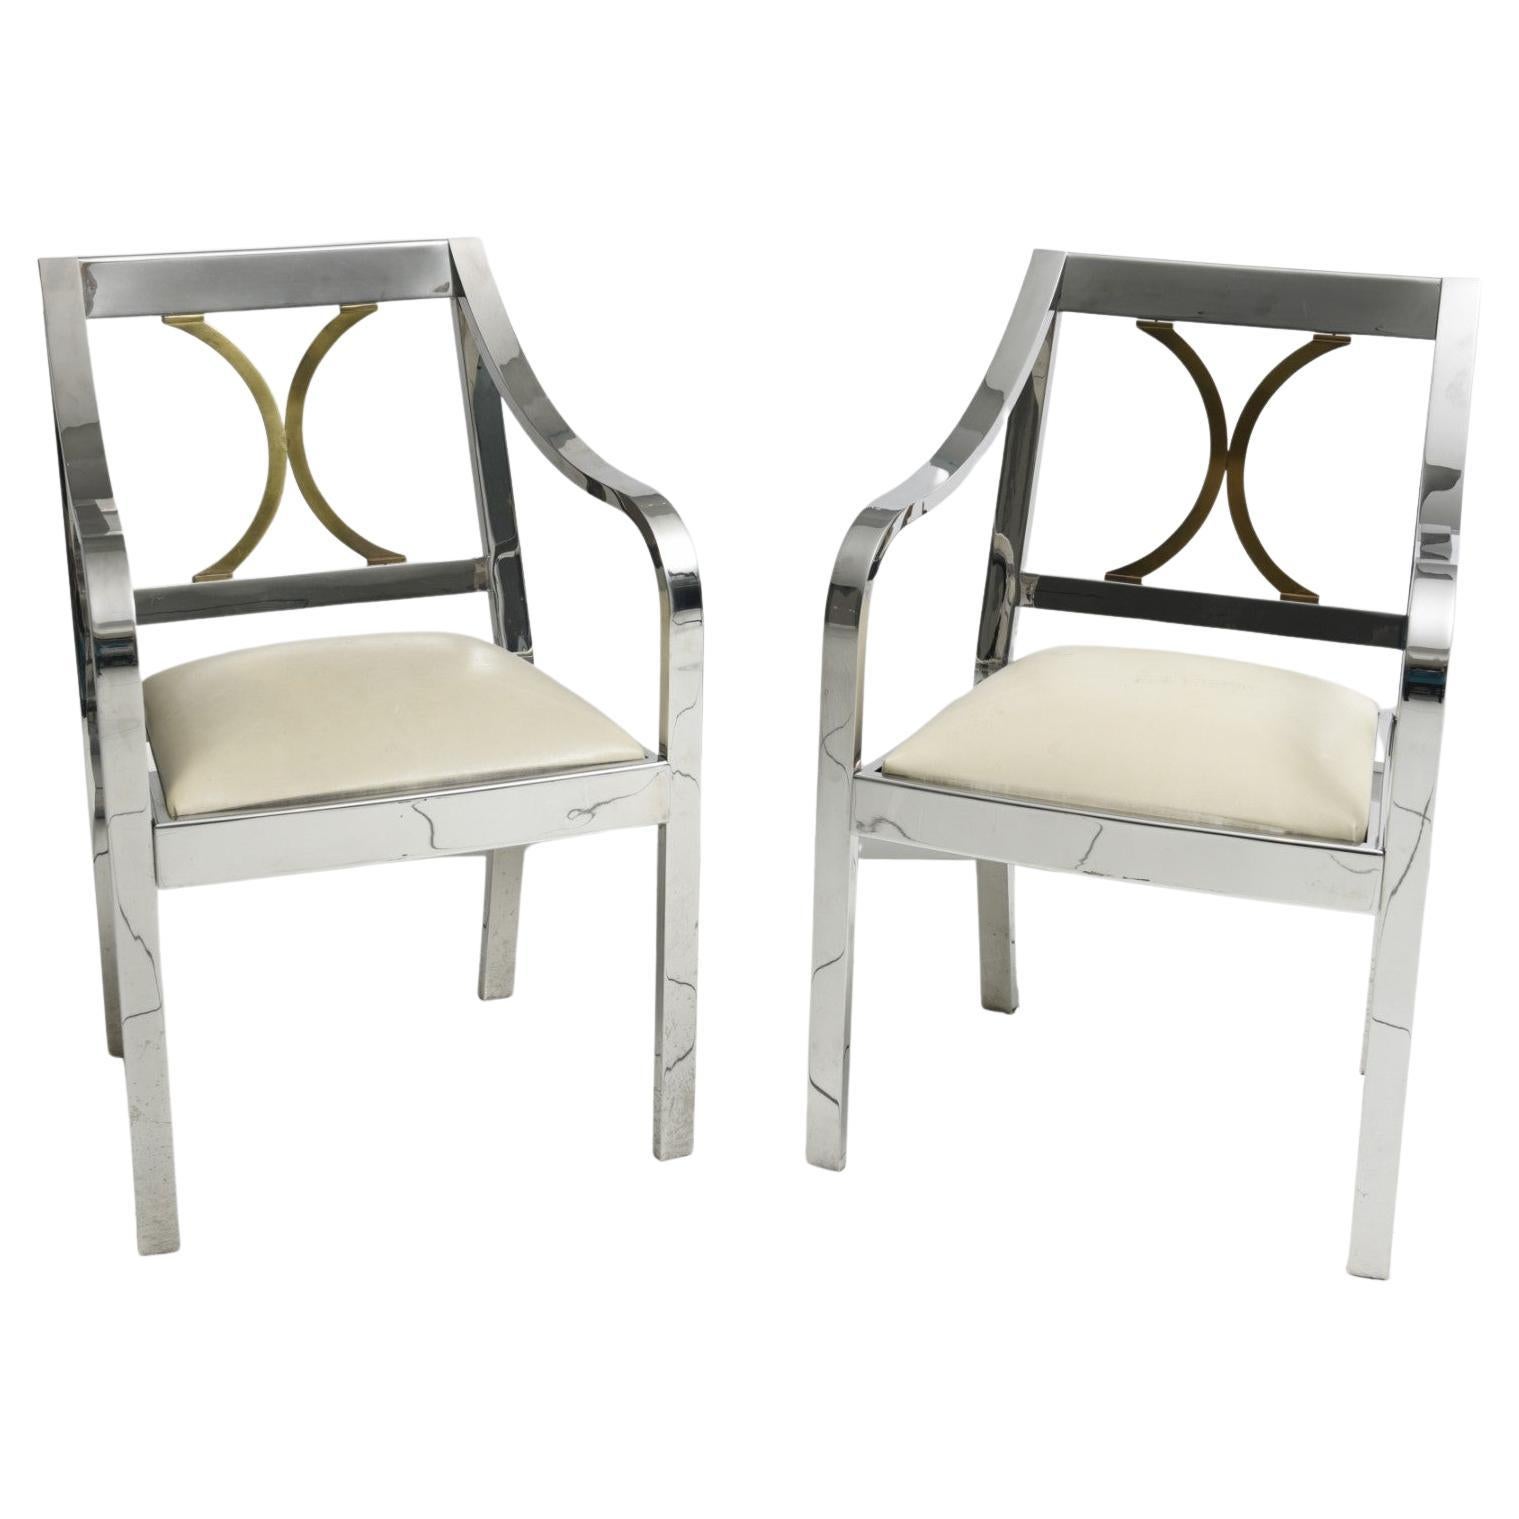 Pair of Original Karl Springer Chairs, Stainless Steel and Brass